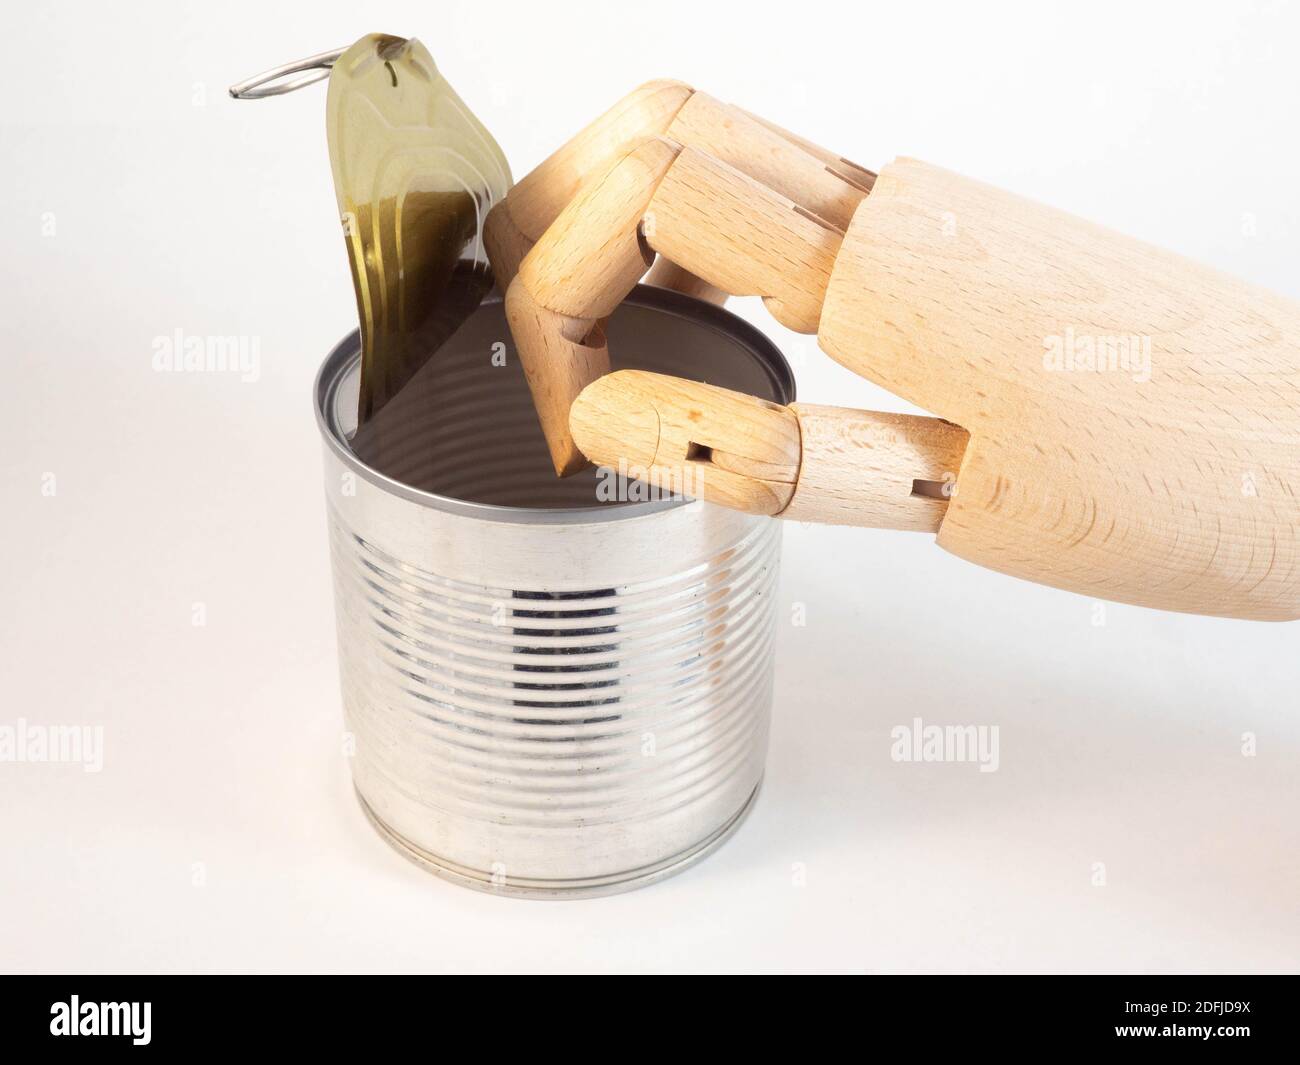 A wooden hand that is above a tin can. Concept around catering and consumption. Stock Photo